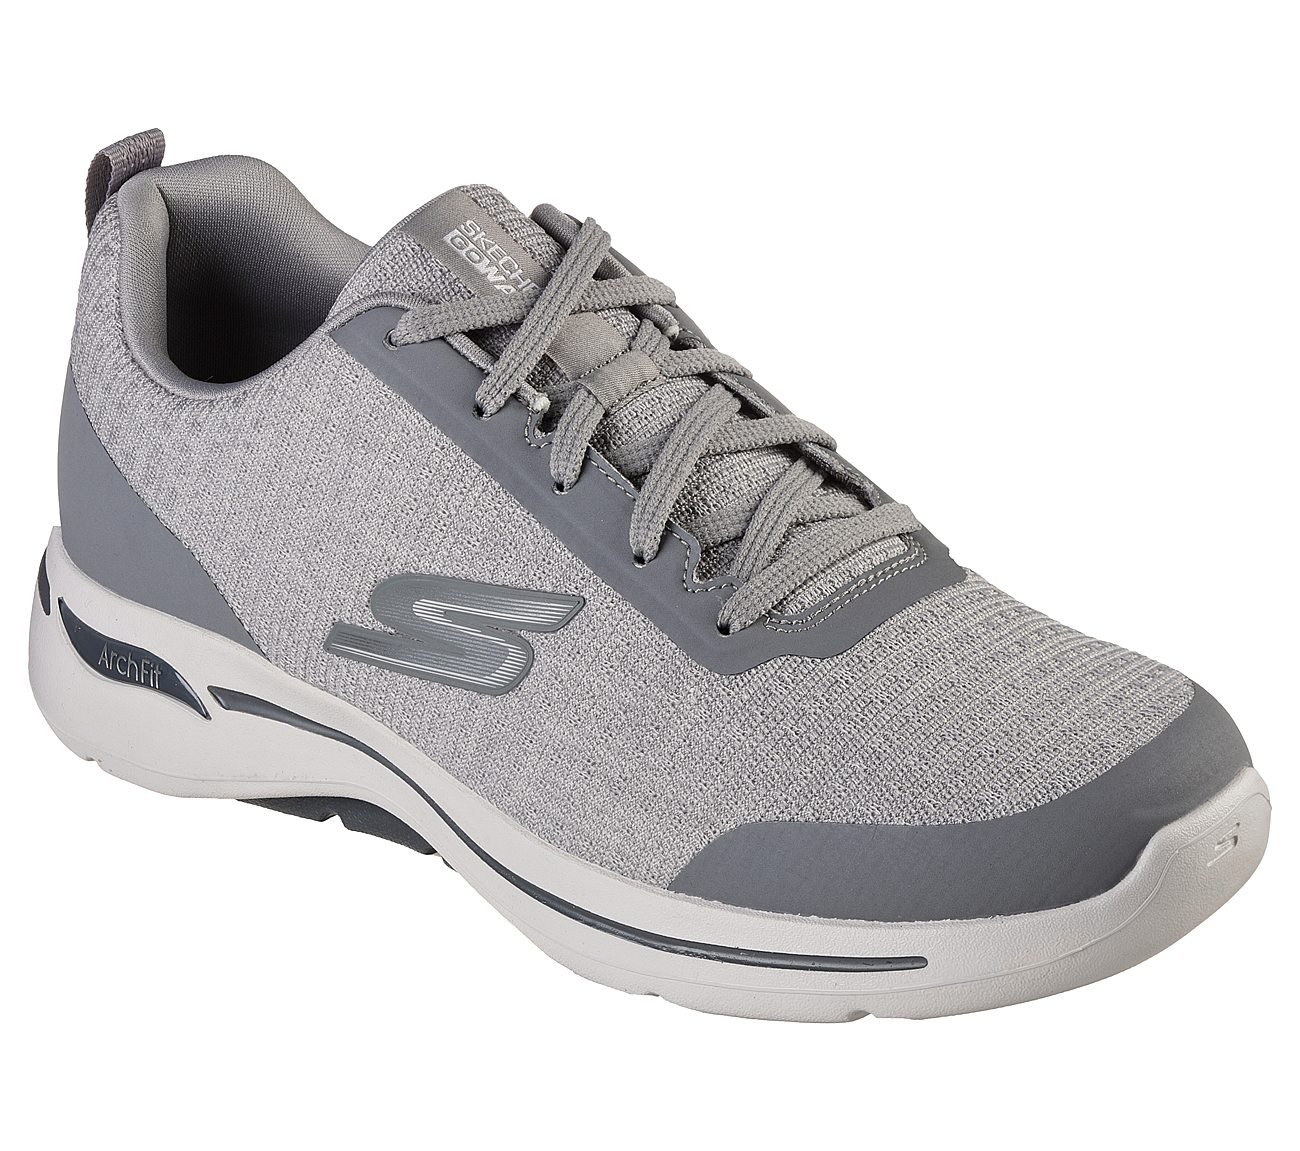 Skechers Grey Go Walk Arch Fit Orion Mens Lace Up Shoes - Style ID ...